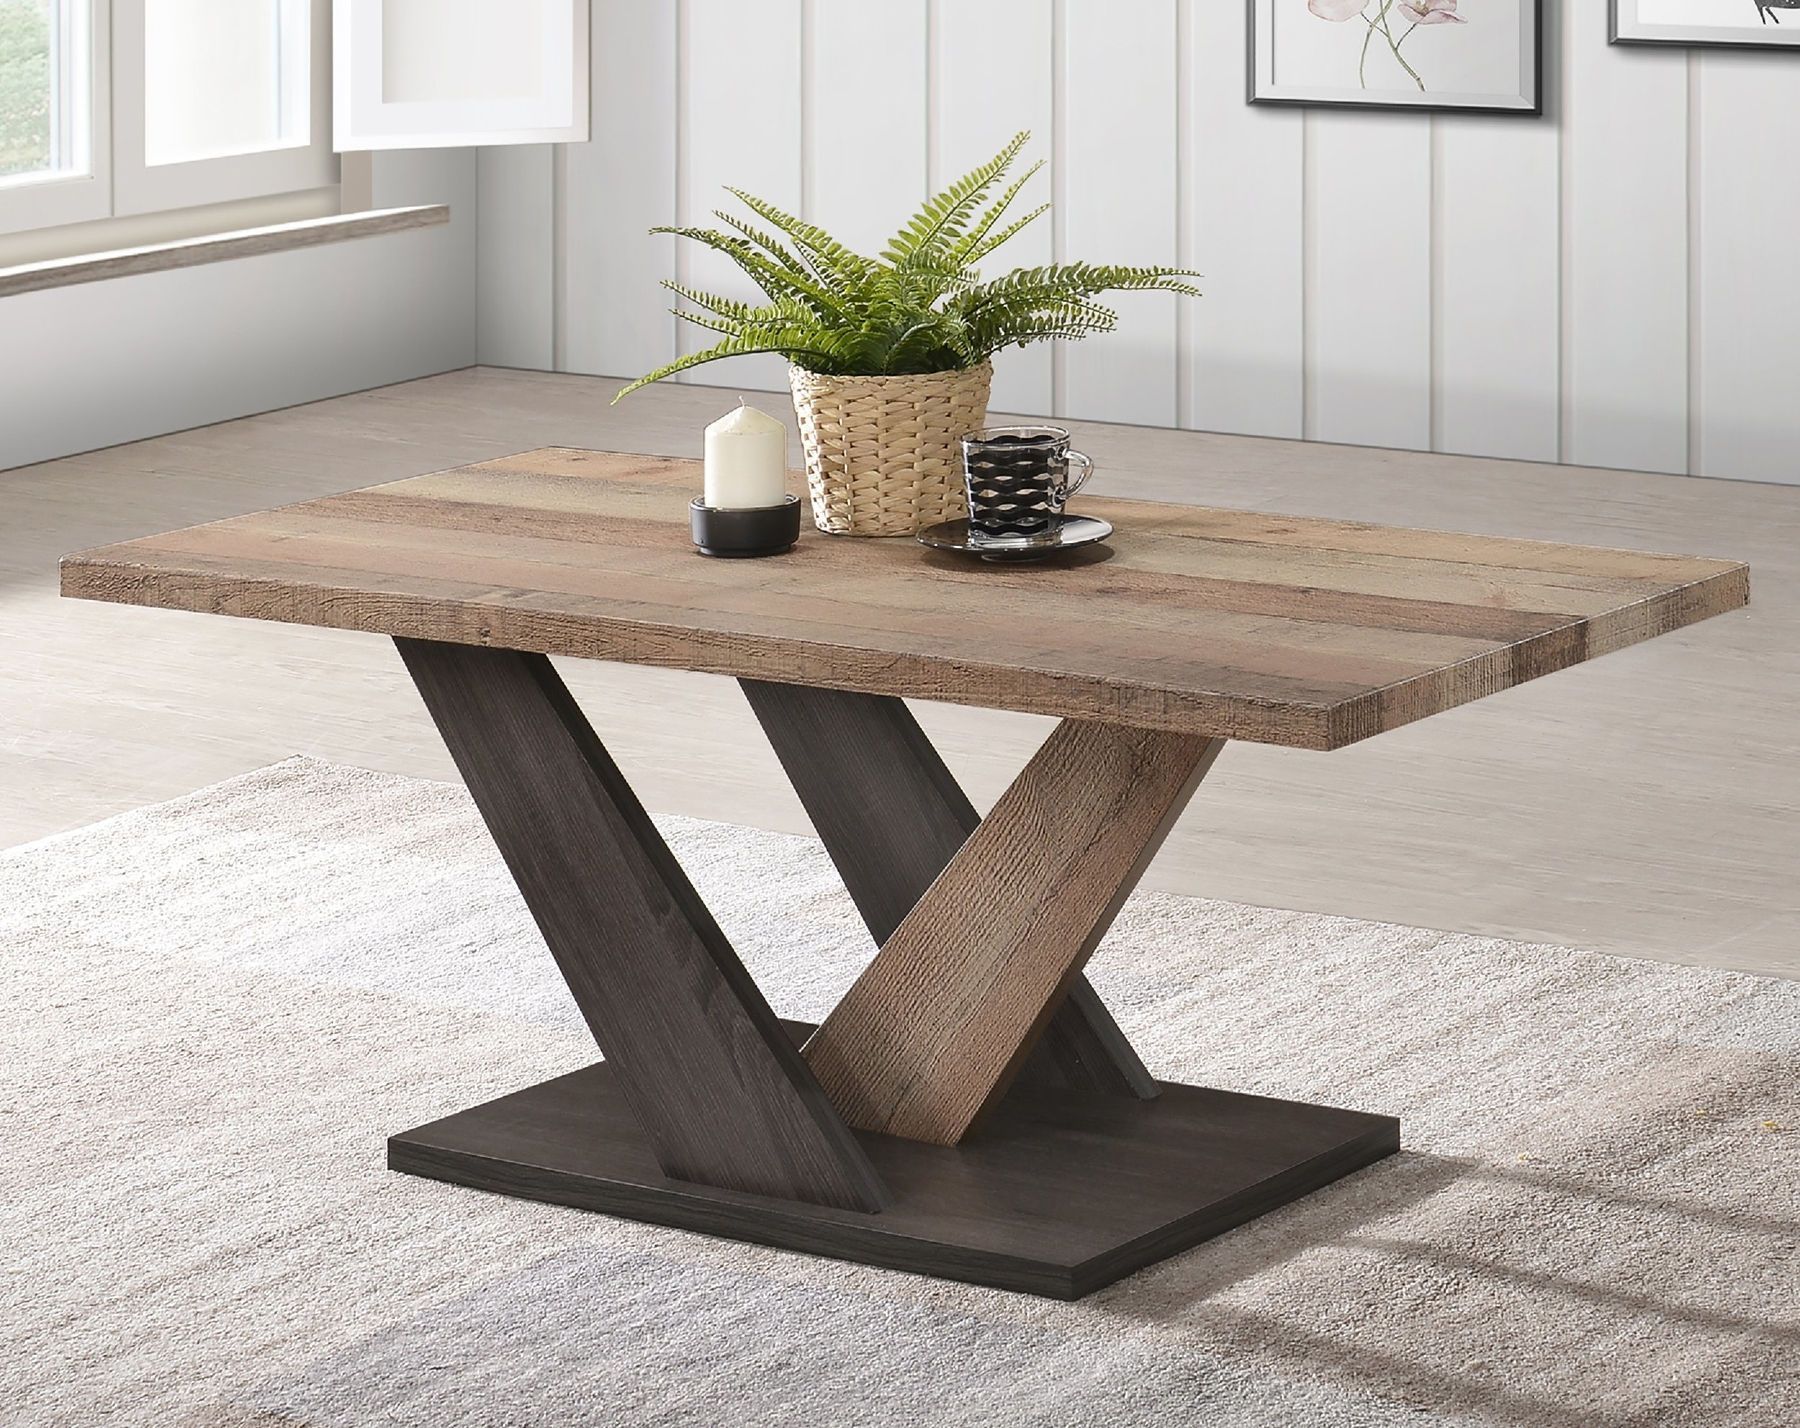 Casamode Carla V Shaped Base Modern Coffee Table | Coffee Table Design Within Rectangular Coffee Tables With Pedestal Bases (Gallery 16 of 20)